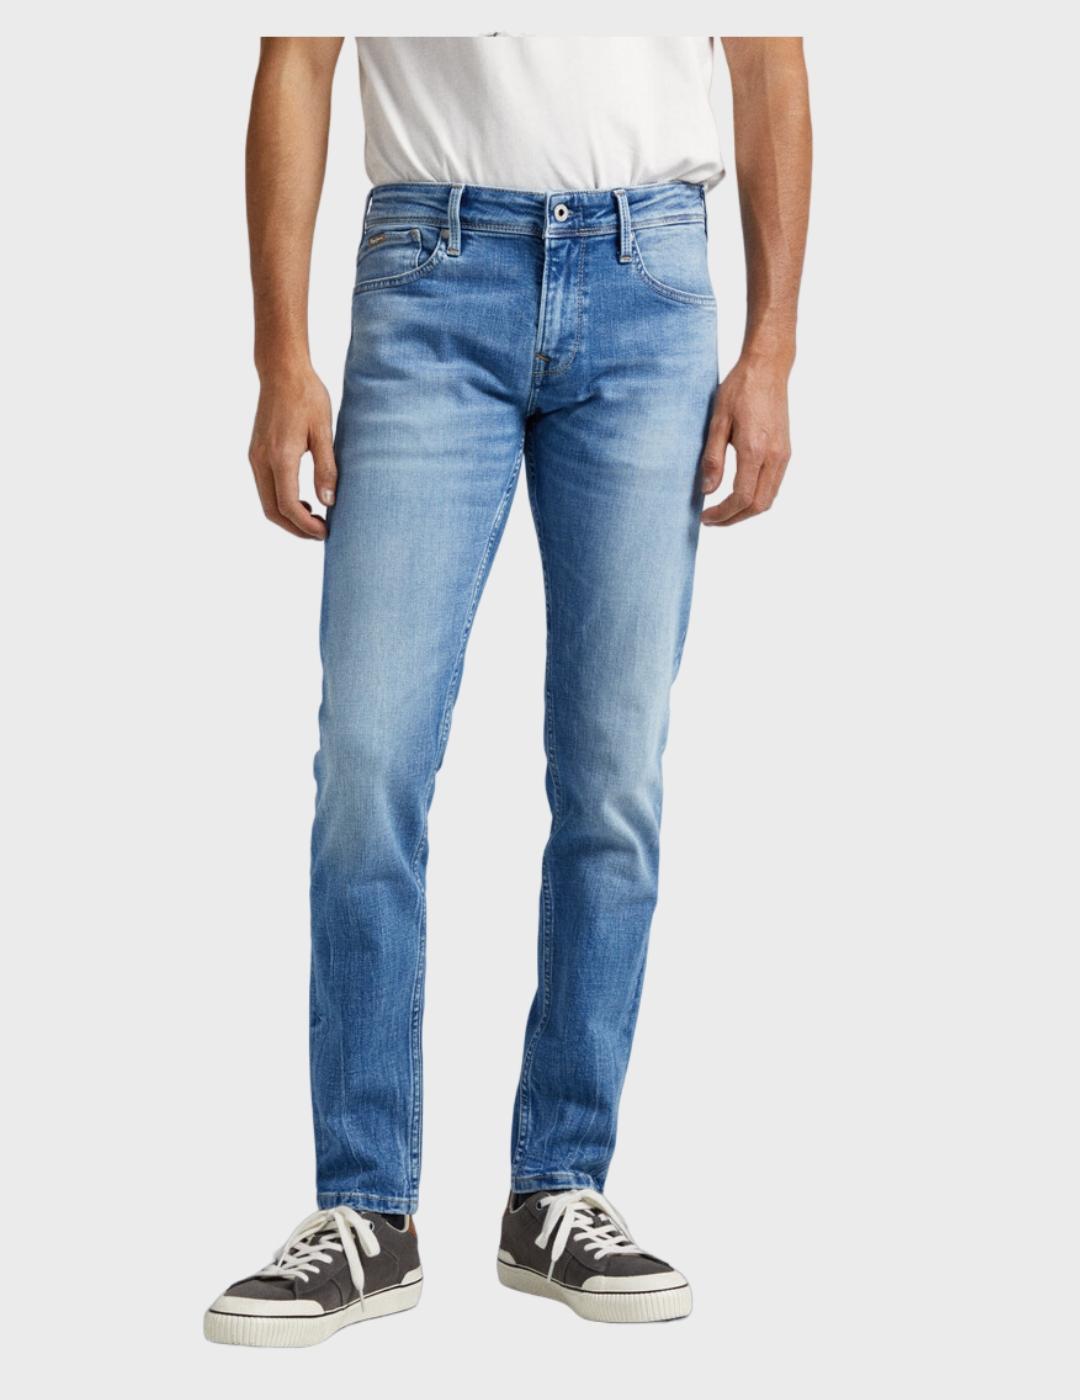 Jeans azules Pepe Jeans Finsbury fit skinny tiro bajo hombre